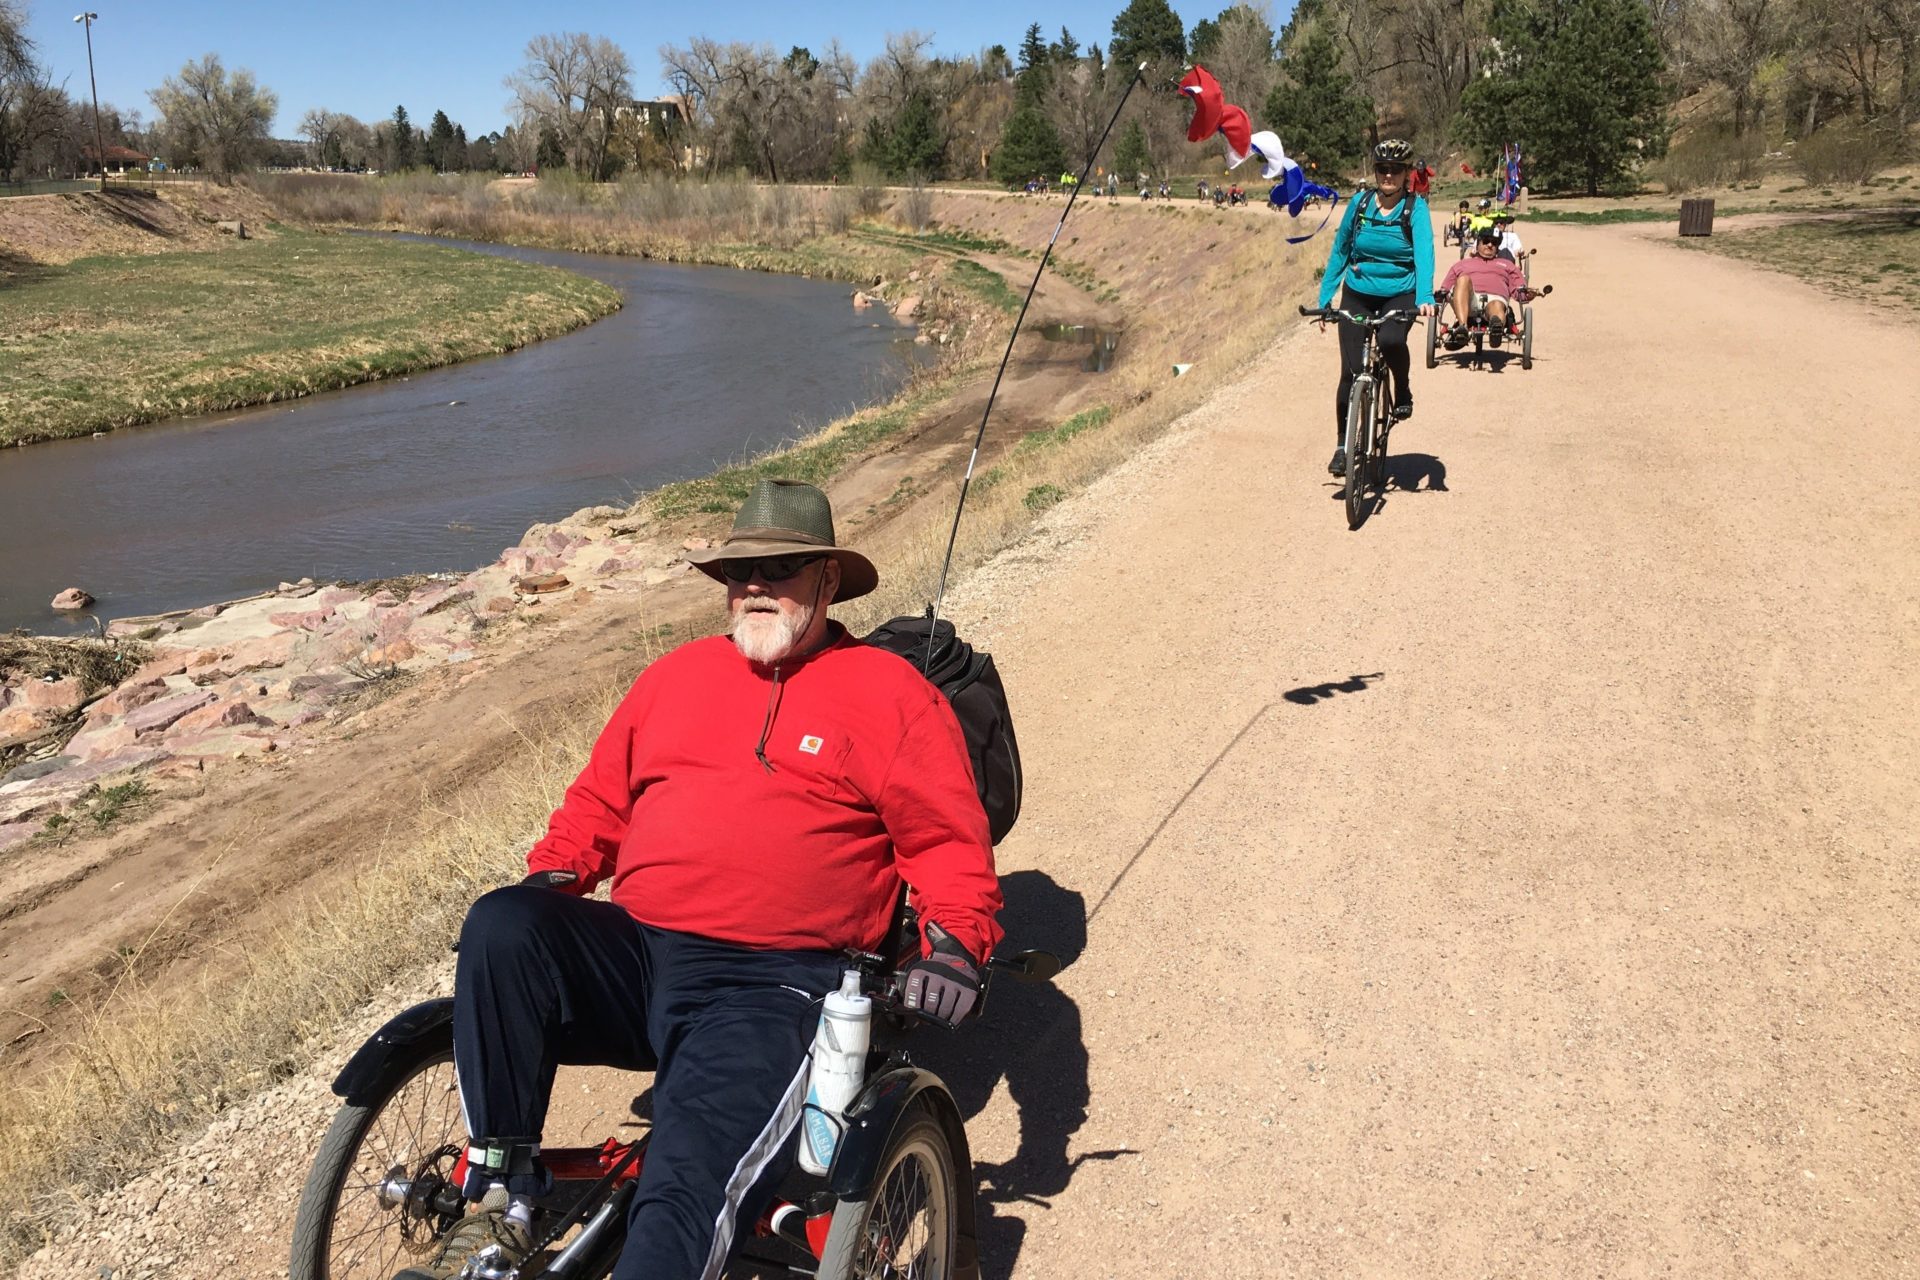 People ride on a dirt trail. In the foreground is a person riding a recumbent trike. Further in the background there are more people riding recumbent trikes.